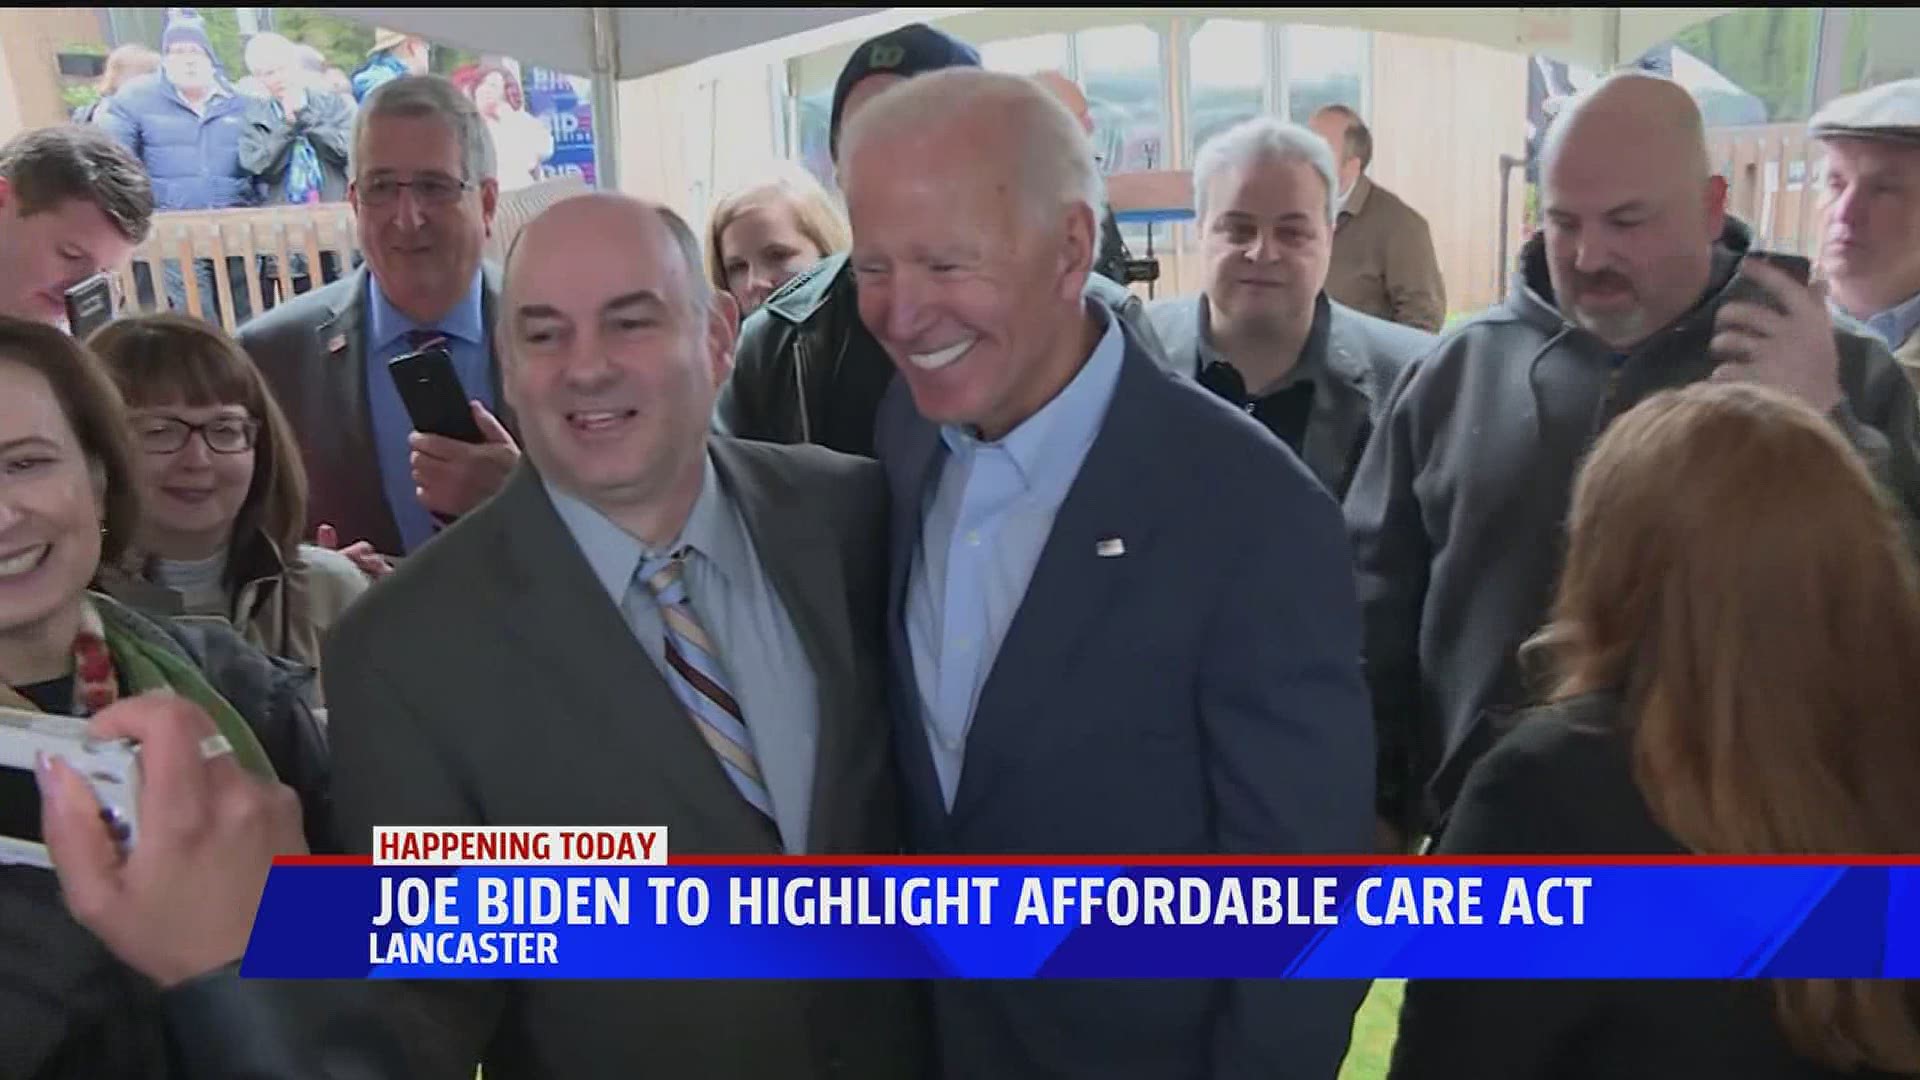 Joe Biden to Highlight Affordable Care Act in Visit to Pennsylvania